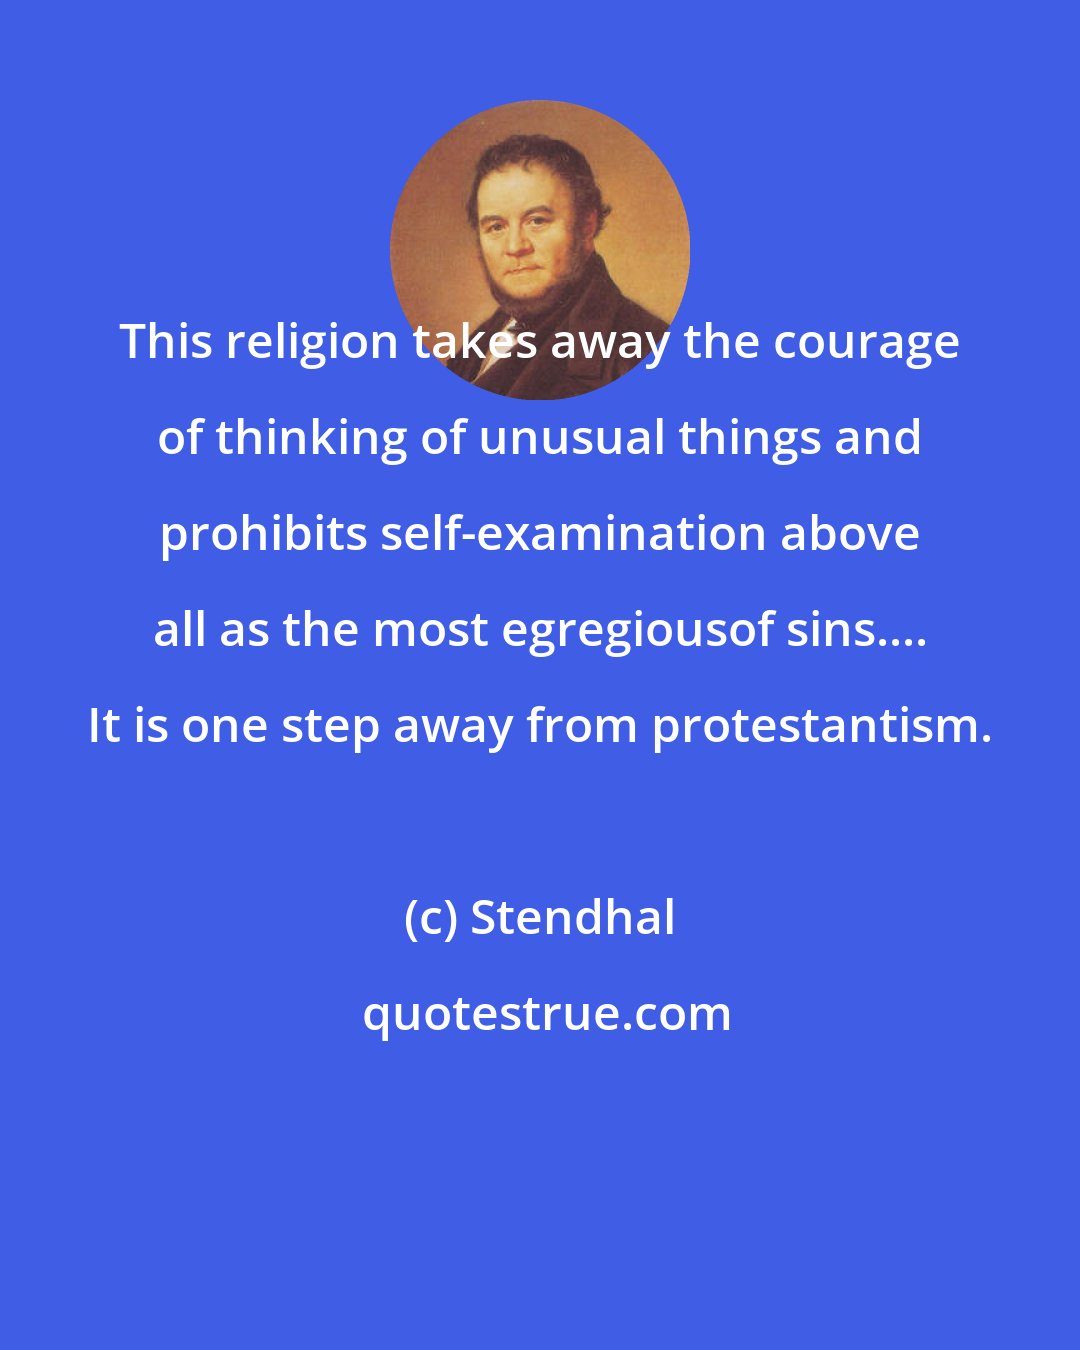 Stendhal: This religion takes away the courage of thinking of unusual things and prohibits self-examination above all as the most egregiousof sins.... It is one step away from protestantism.